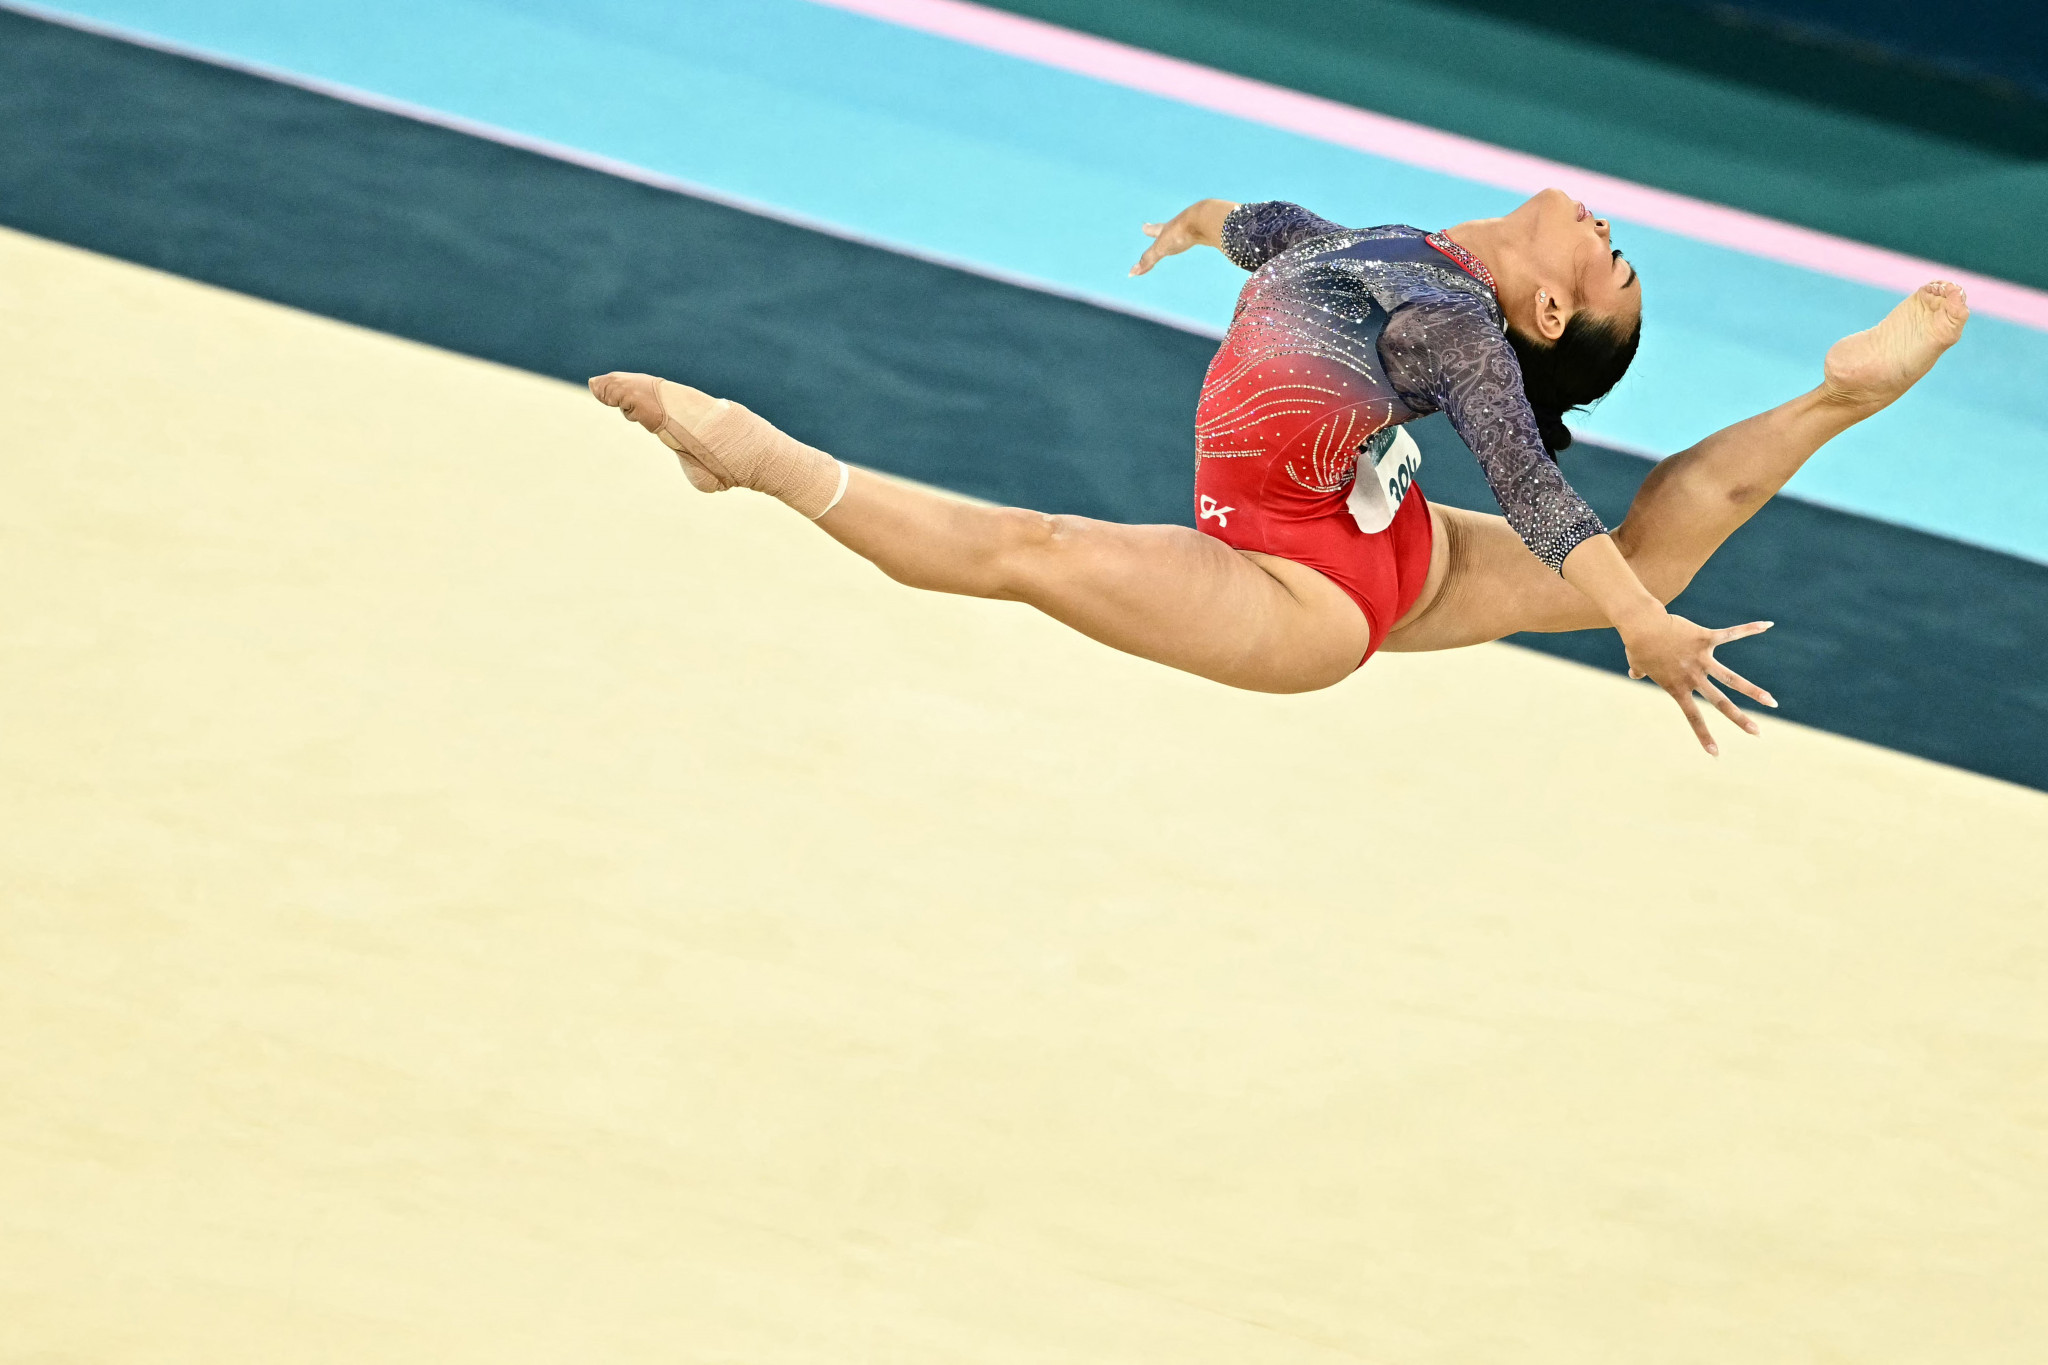 Sunisa Lee competes in the floor exercise event of the artistic gymnastics women's all-around final. GETTY IMAGES